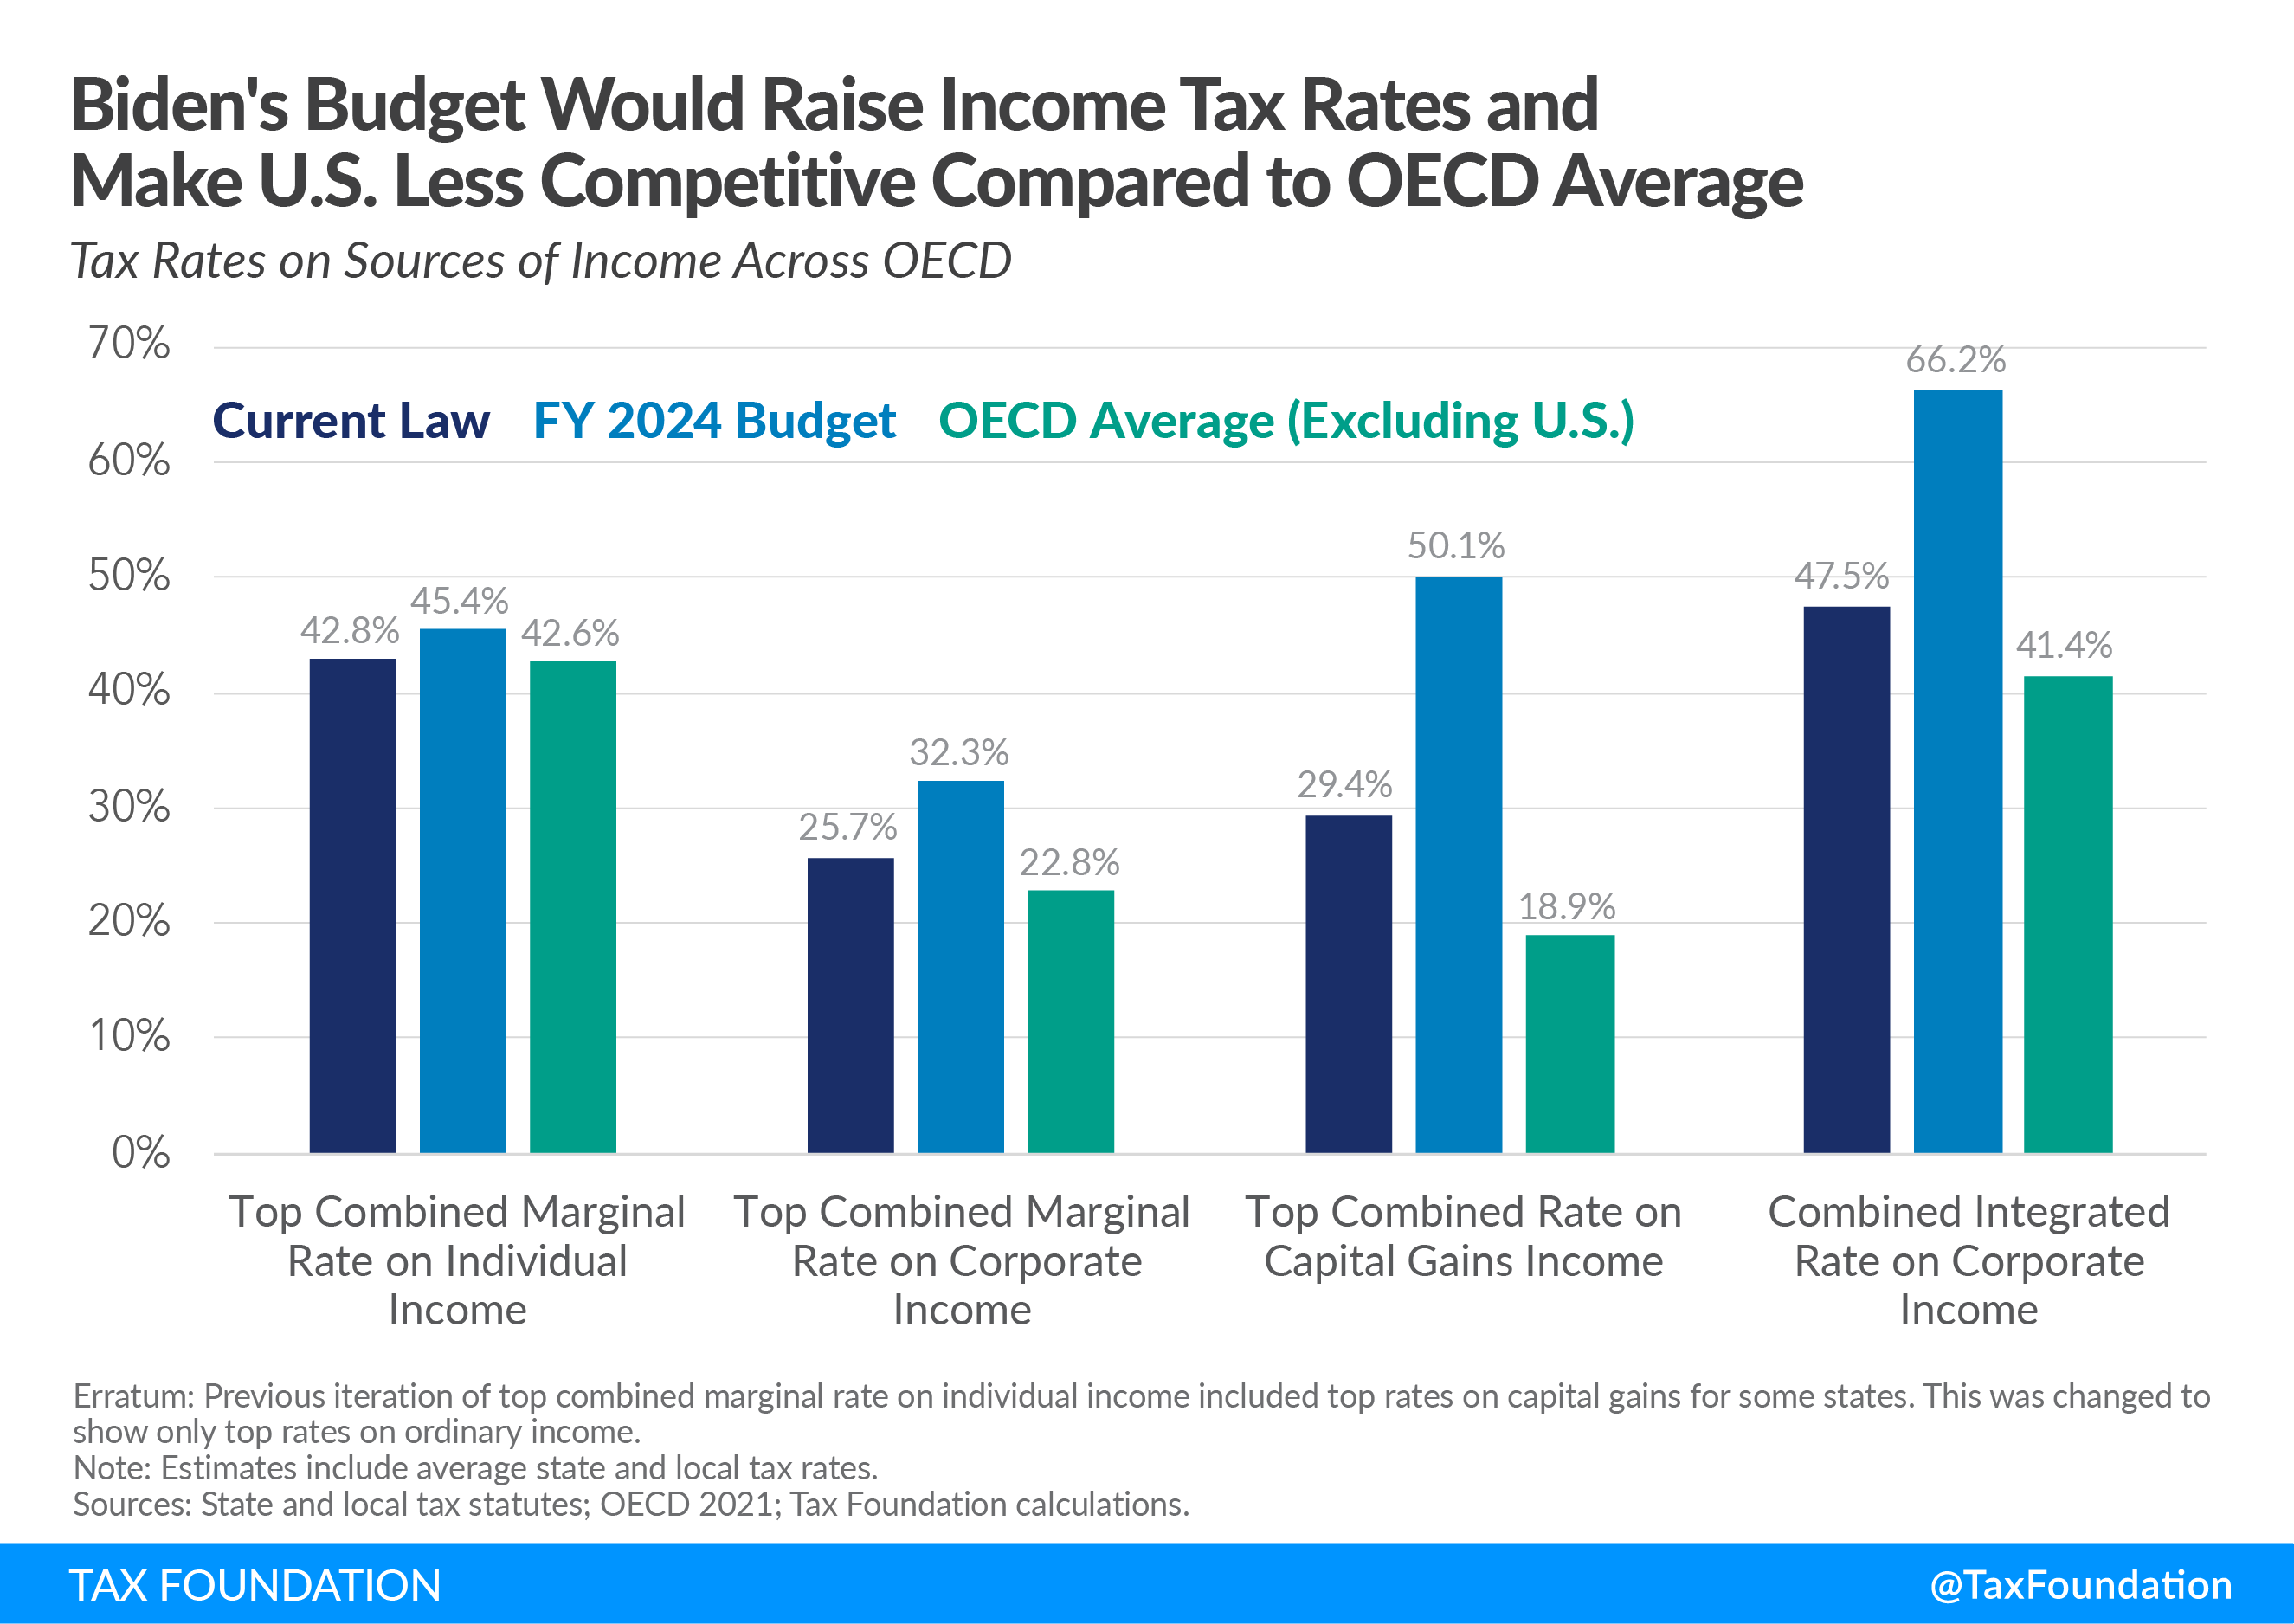 Biden Budget tax rates would be out of step internationally FV 2